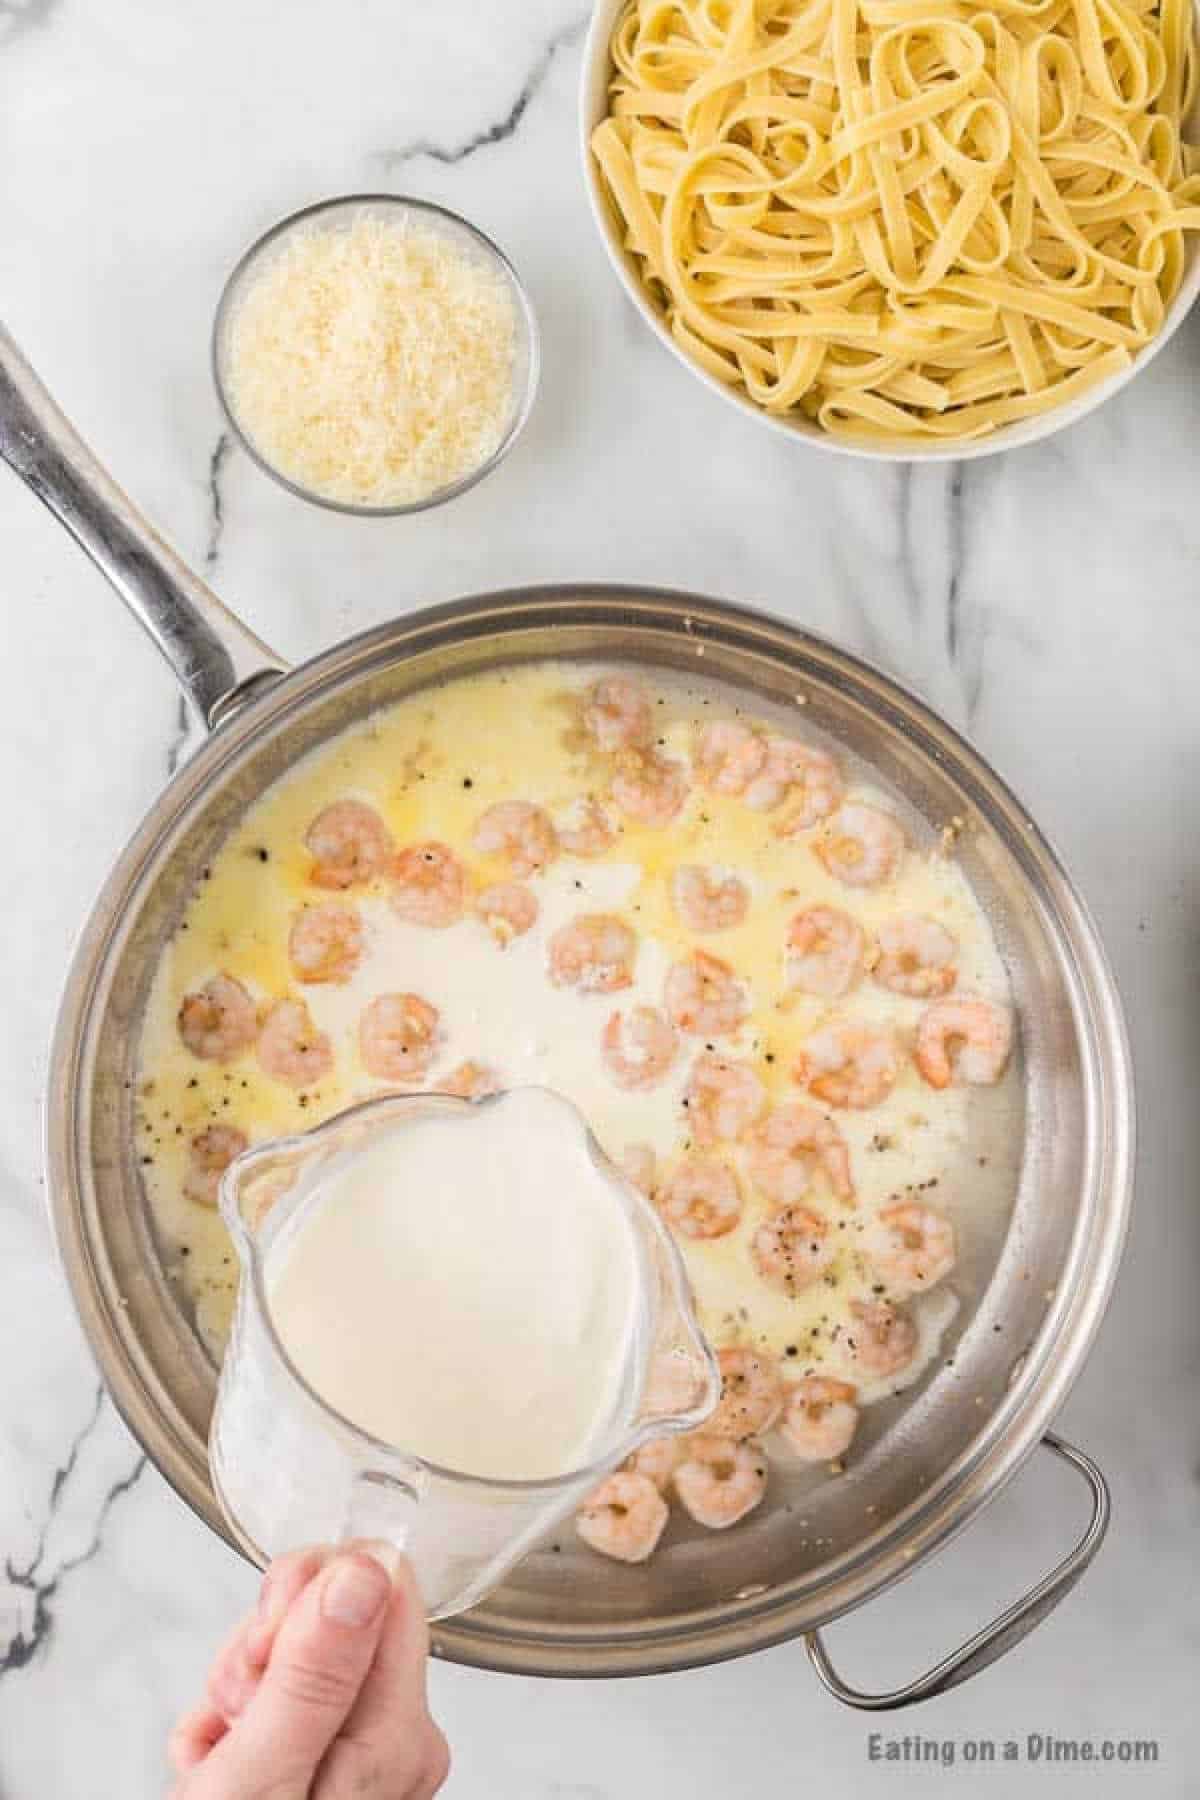 Pouring the cream in the skillet with the seasoned shrimp with a bowl of parmesan cheese and fettuccini noodles on the side